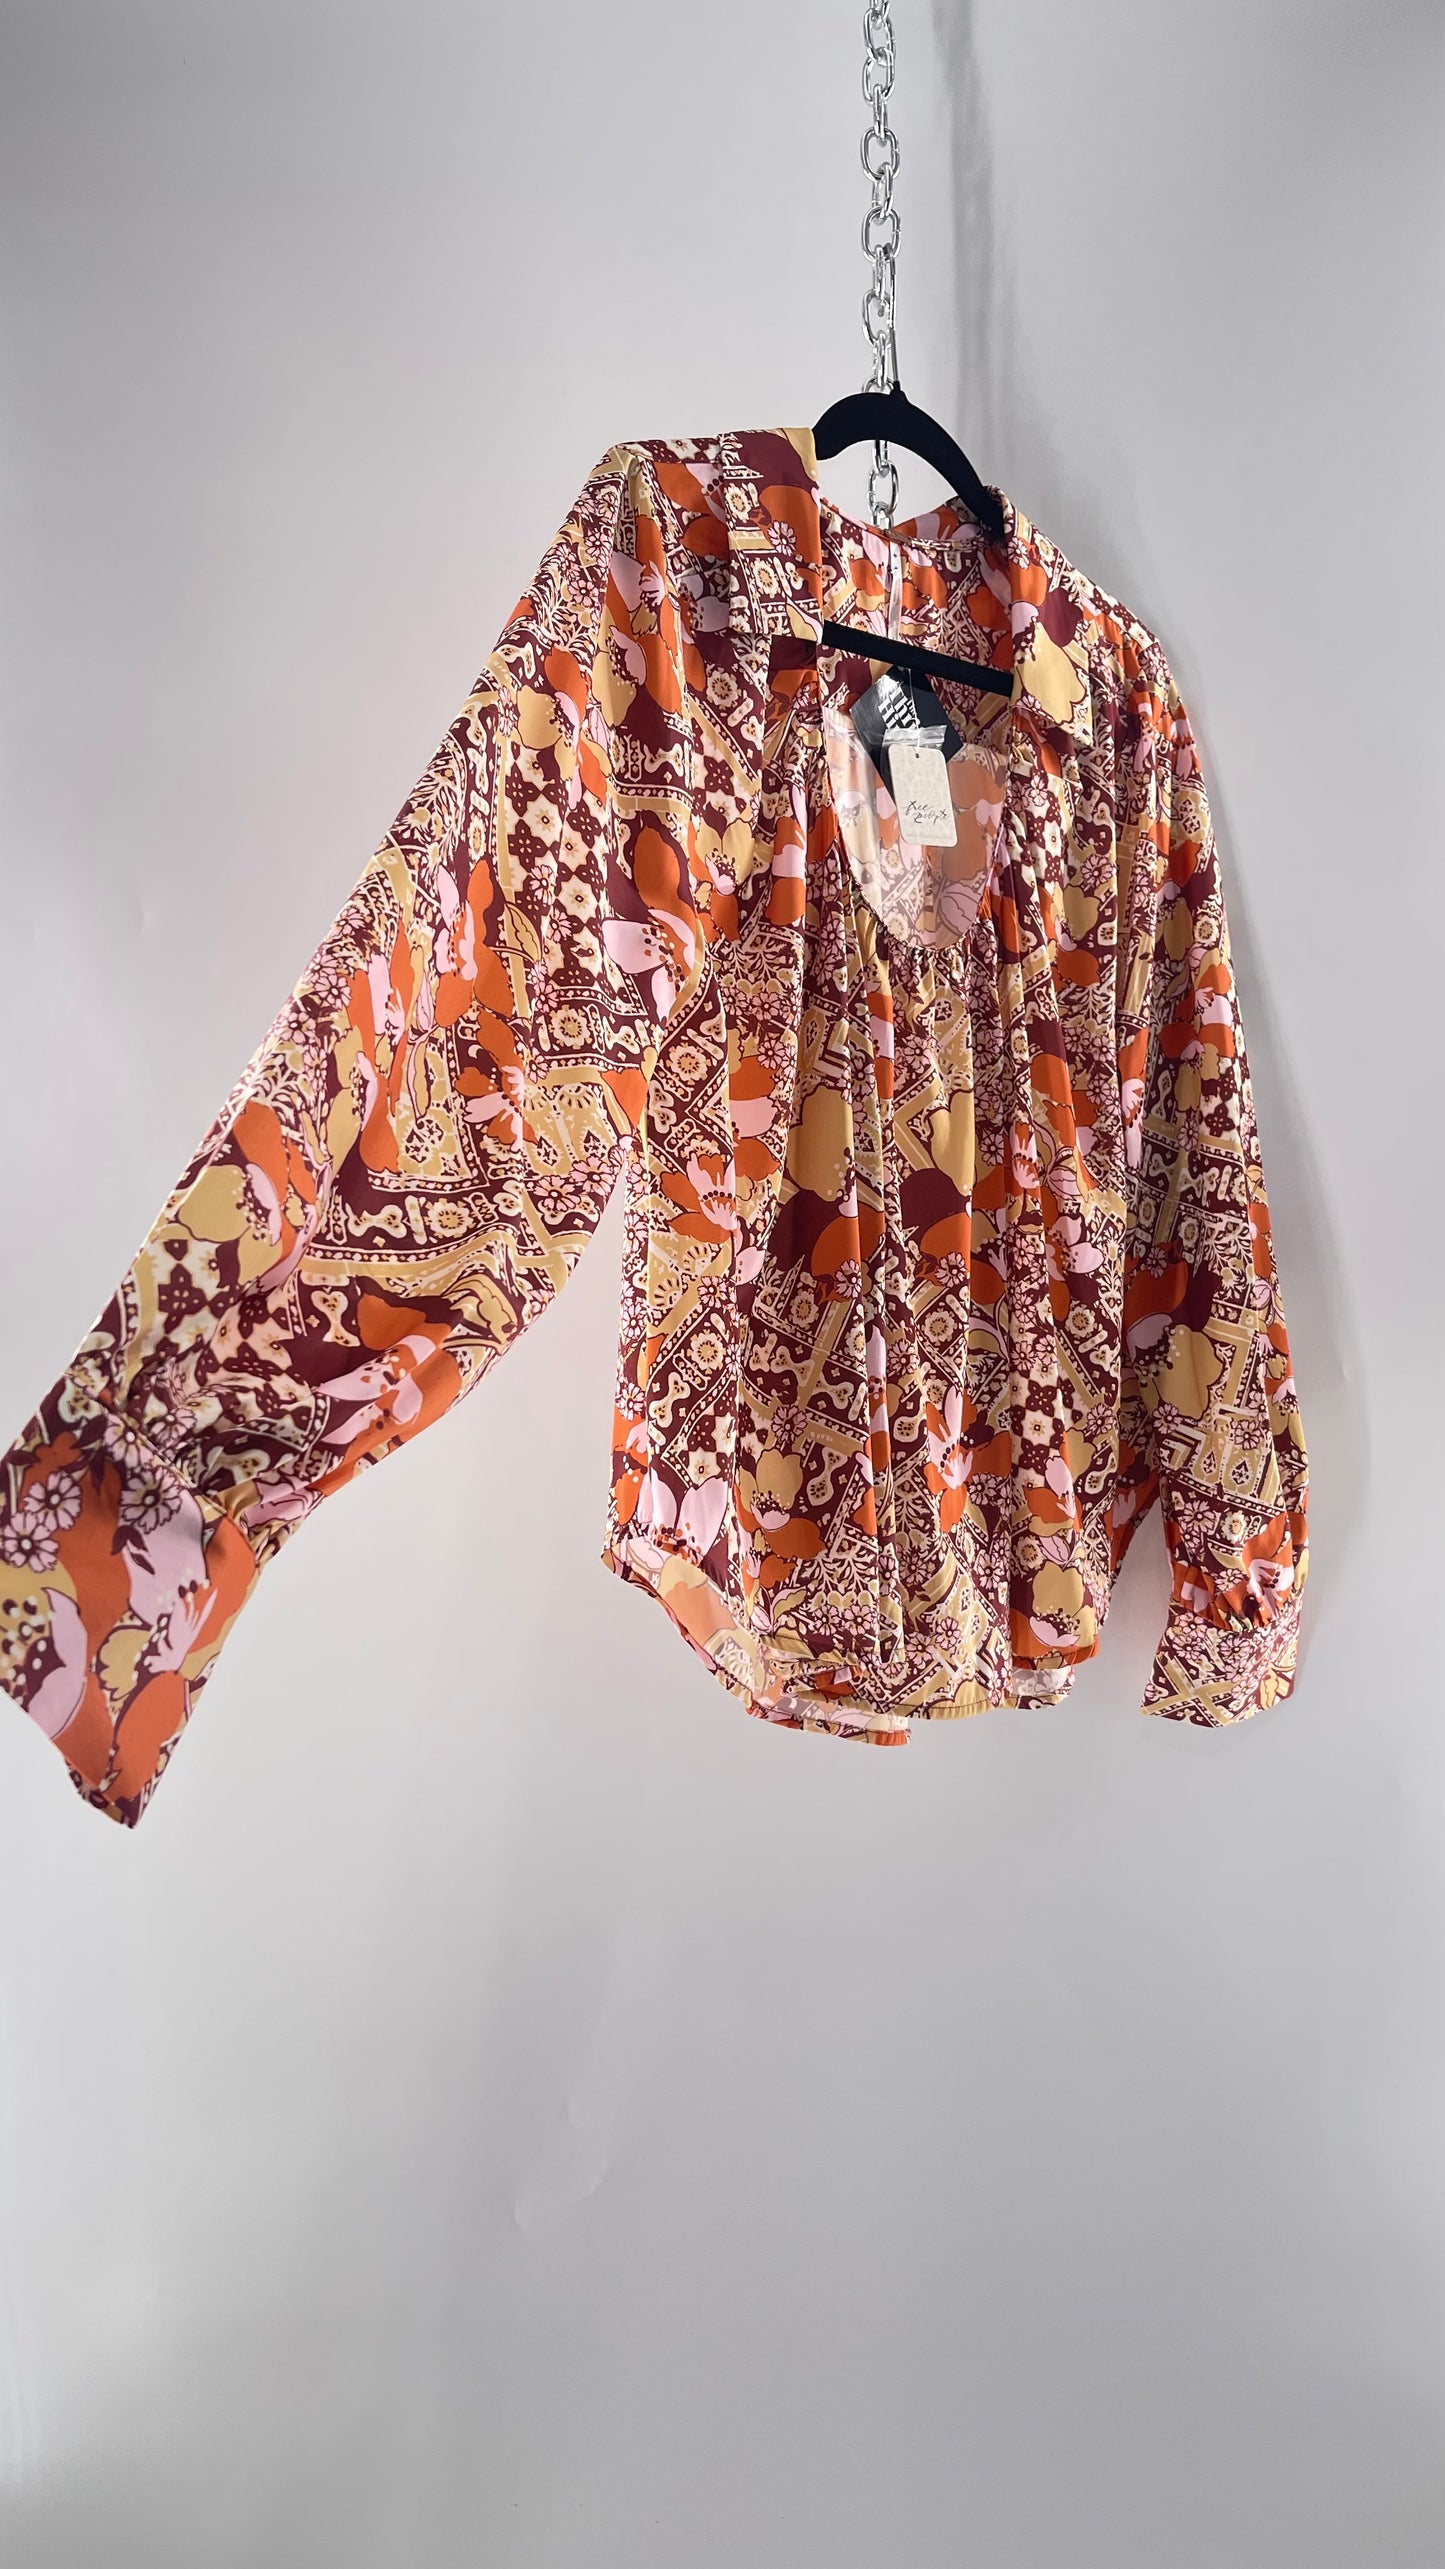 Free People All Over Mixed Warm Toned Satin Blouse with Pleated/Draping Neckline and Collar, Tags Attached  (Small)